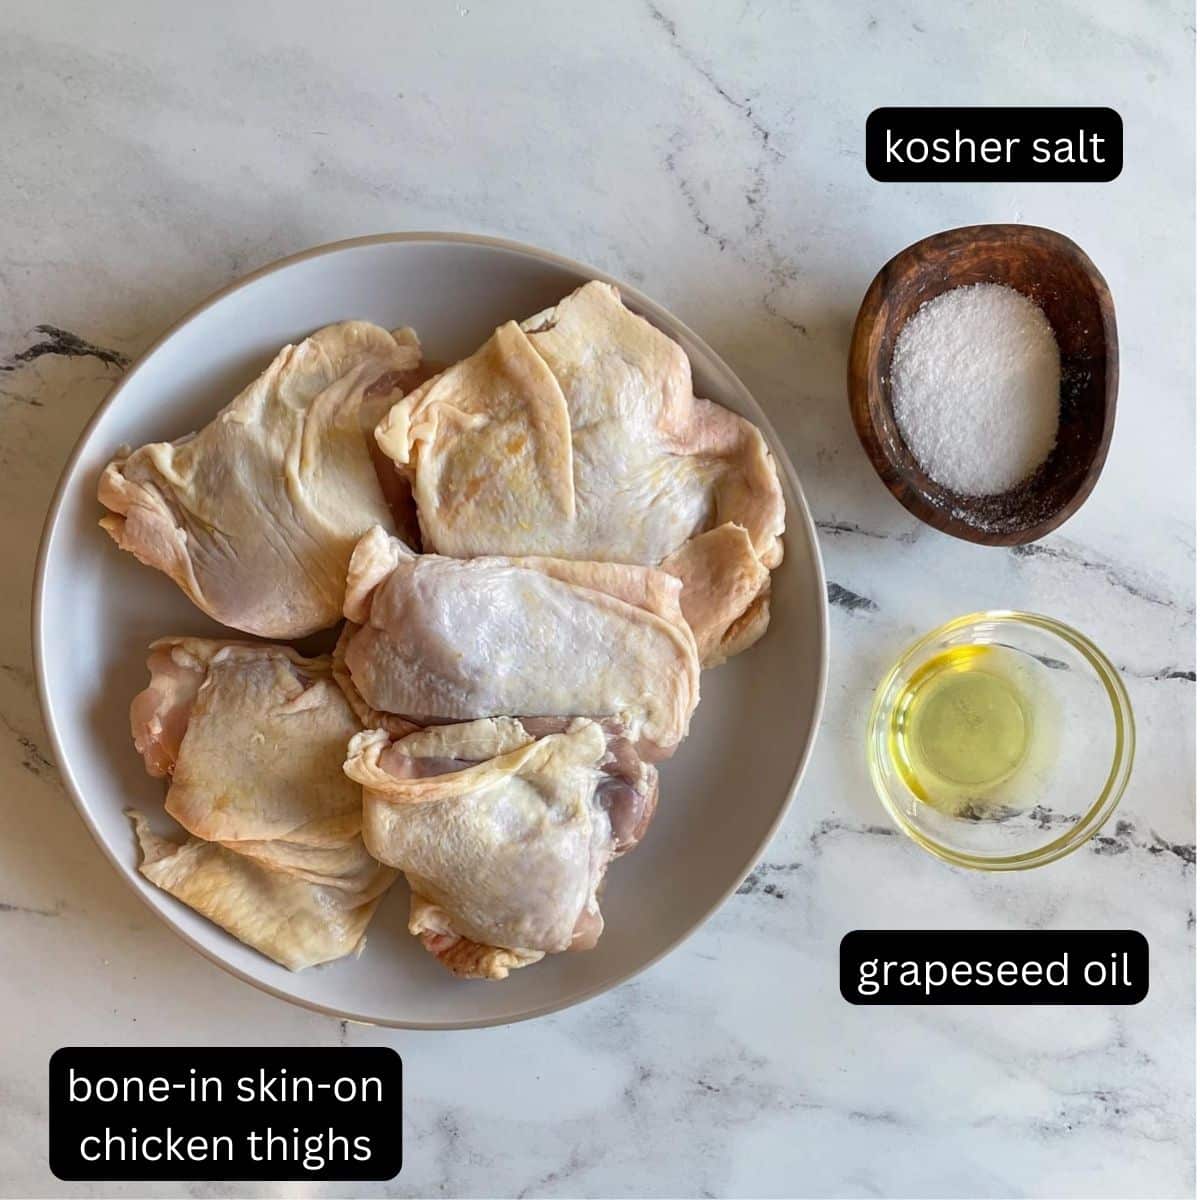 The labeled ingredients for Cast Iron Chicken sit on a white marble counter; they include: bone-in, skin-on chicken thighs, grapeseed oil, and kosher salt.